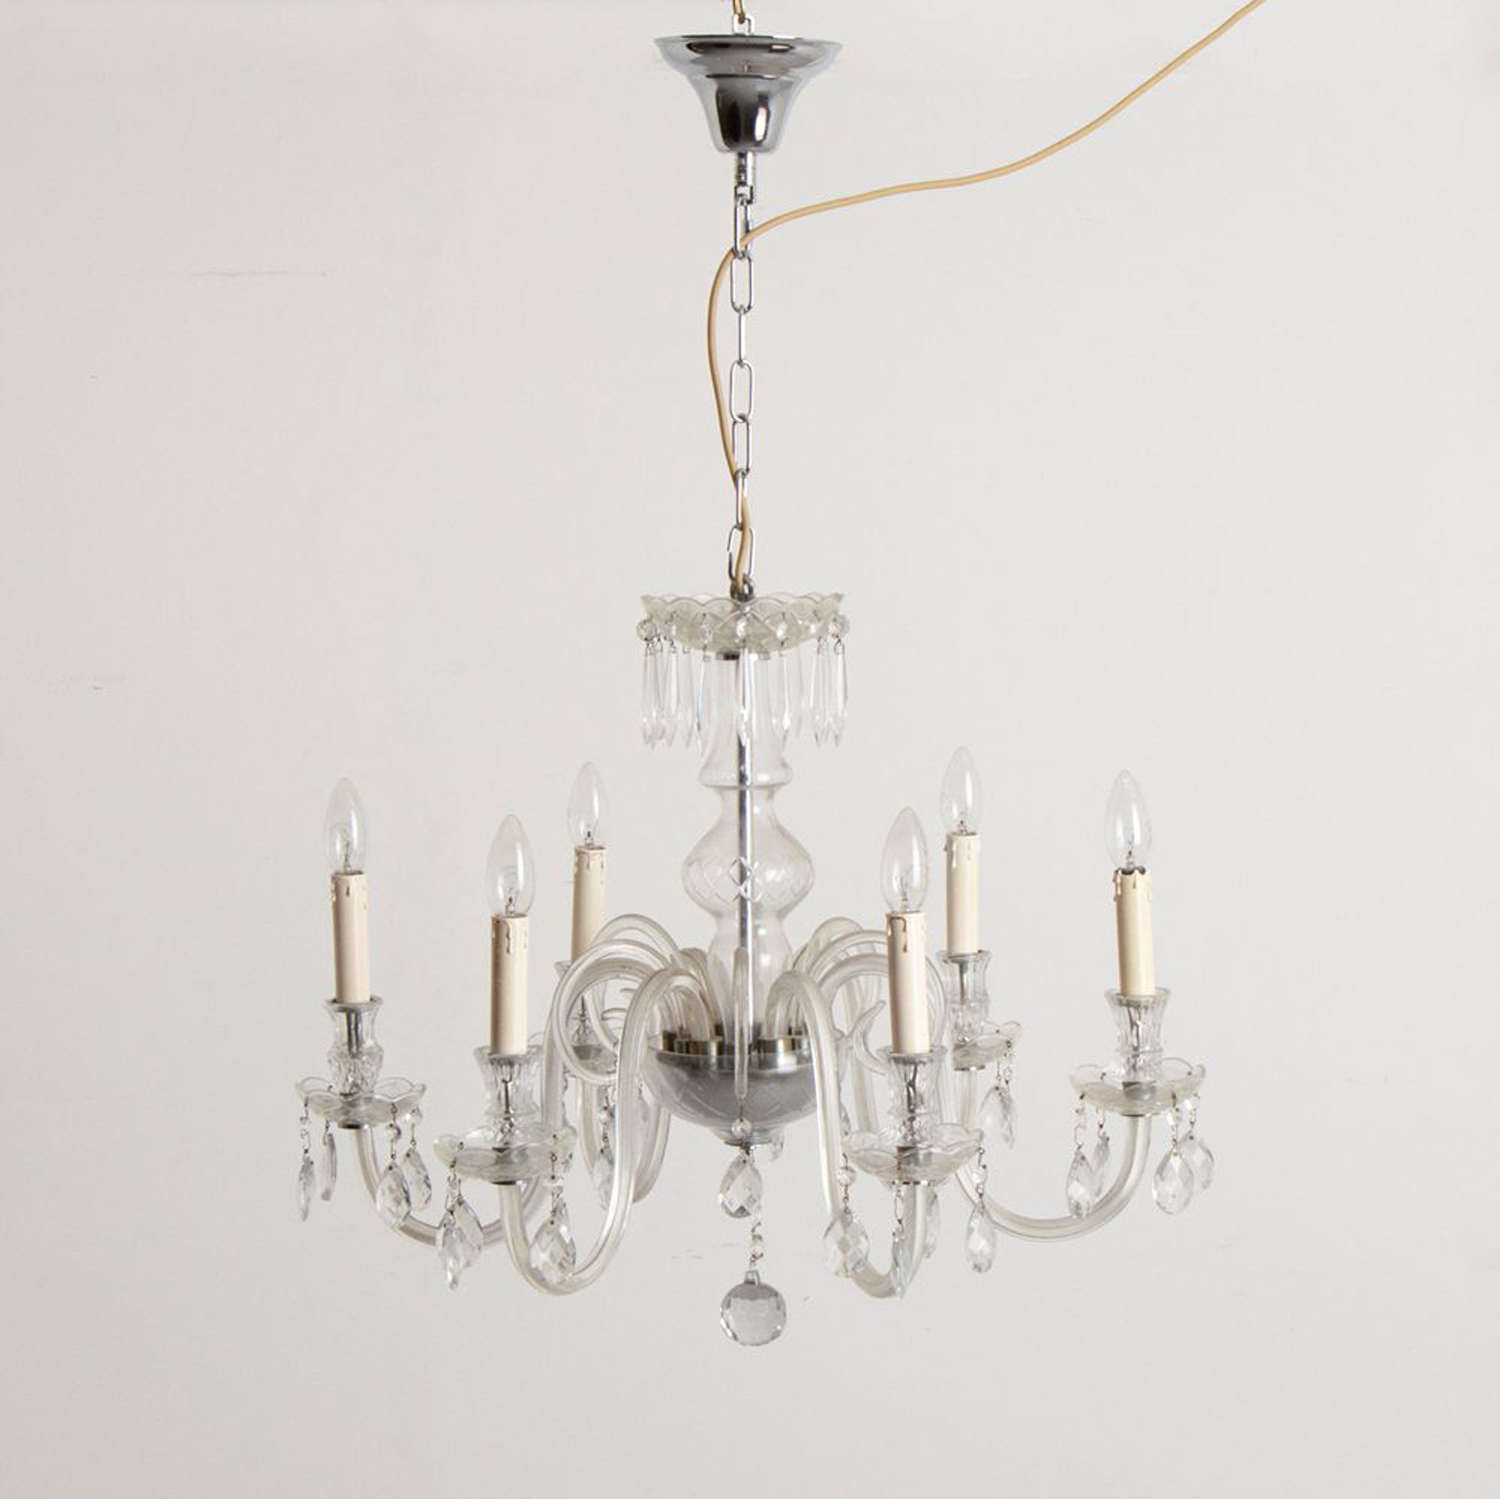 A 1920's swan style large chandelier